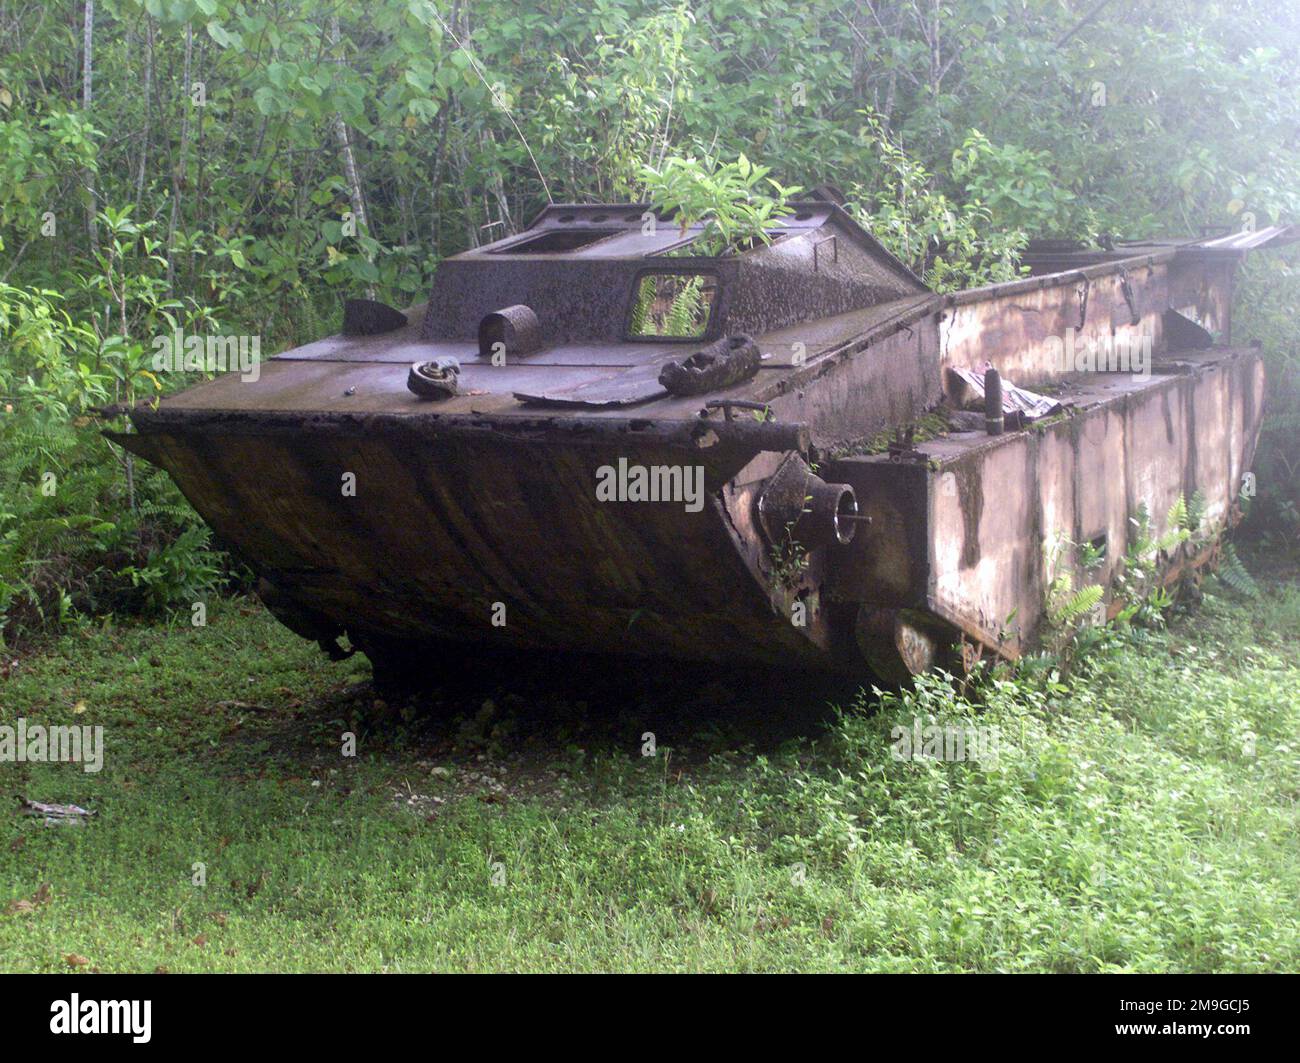 A Landing Vehicle Tracked (Mark II), LVT-2 that was left after the Battle of Peleliu during World War Two on the island of Peleliu. Photograph taken as part of Exercise KOA THUNDER 2001. Marines from Aviation Support Element, Kaneohe Bay, Hawaii, 1ST Marine Air Wing, Okinawa, Japan, and 3rd Marines 7th Battalion 29 Palms, California, participated in KOA THUNDER on the island of Guam from July 9 to July 14. The purpose of the exercise was to demonstrate the Marine Corps ability to deploy in the South Pacific from places other than Okinawa, Japan. Subject Operation/Series: KOA THUNDER 2001 Base: Stock Photo